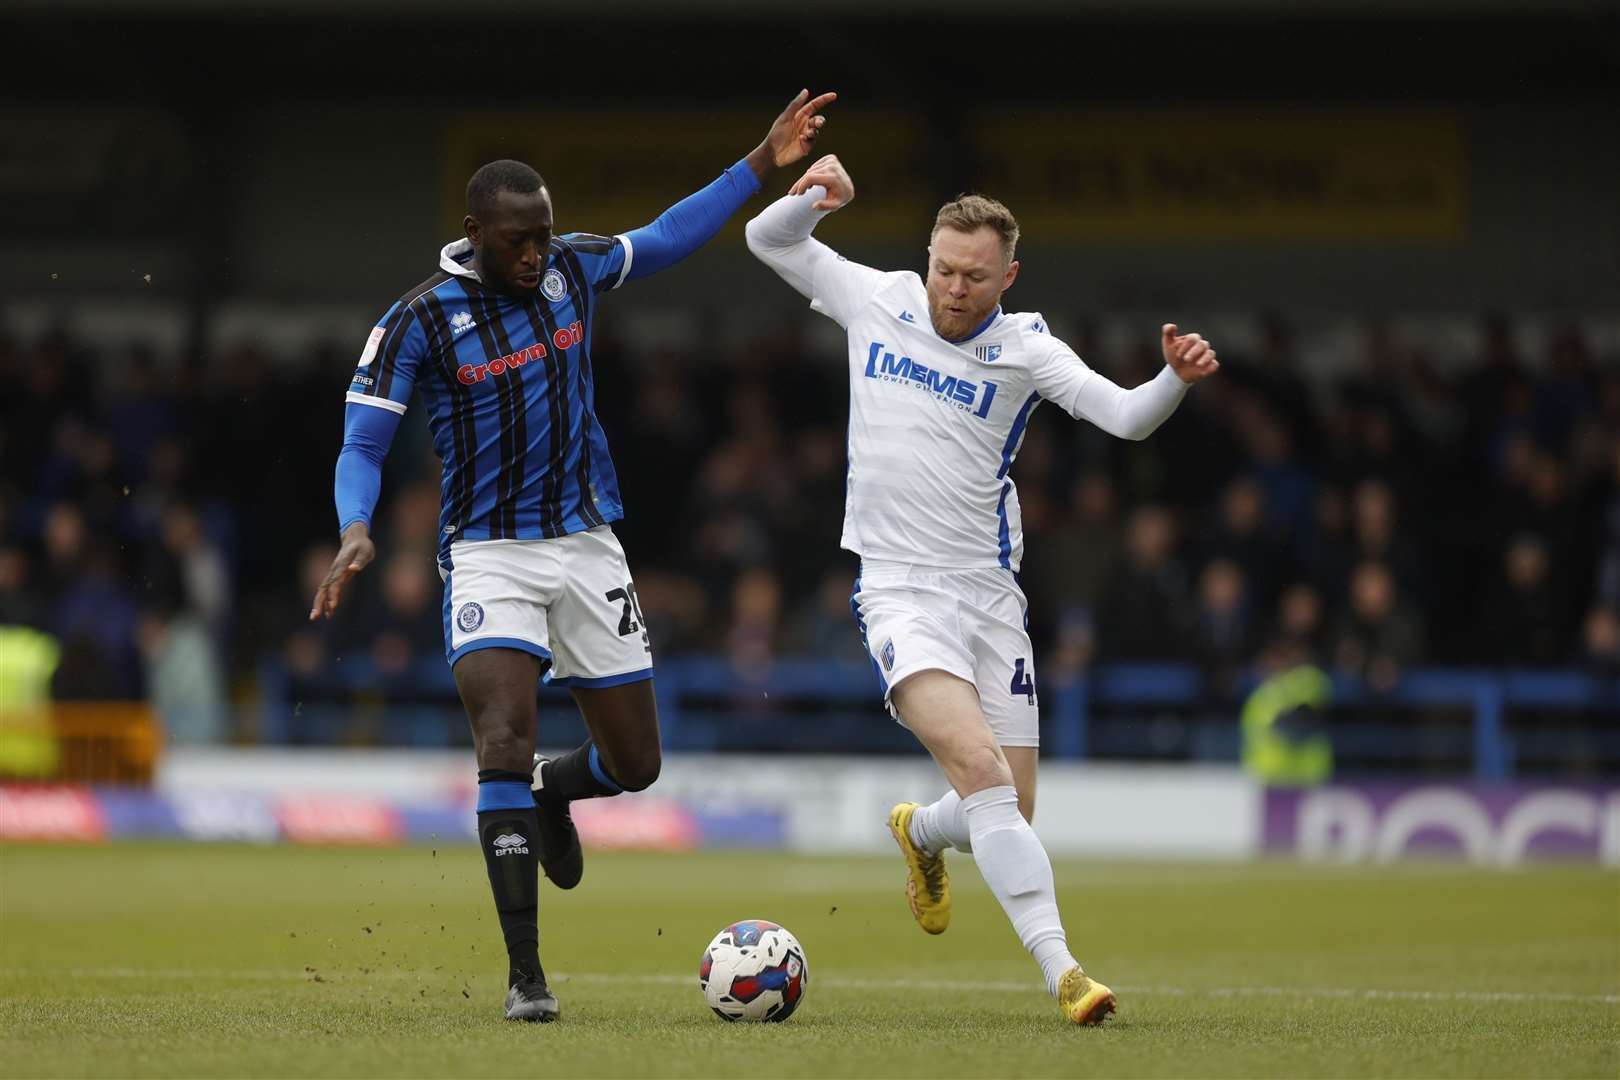 Gillingham loan forward Aiden O’Brien is set to miss the remaining games of the season through injury.